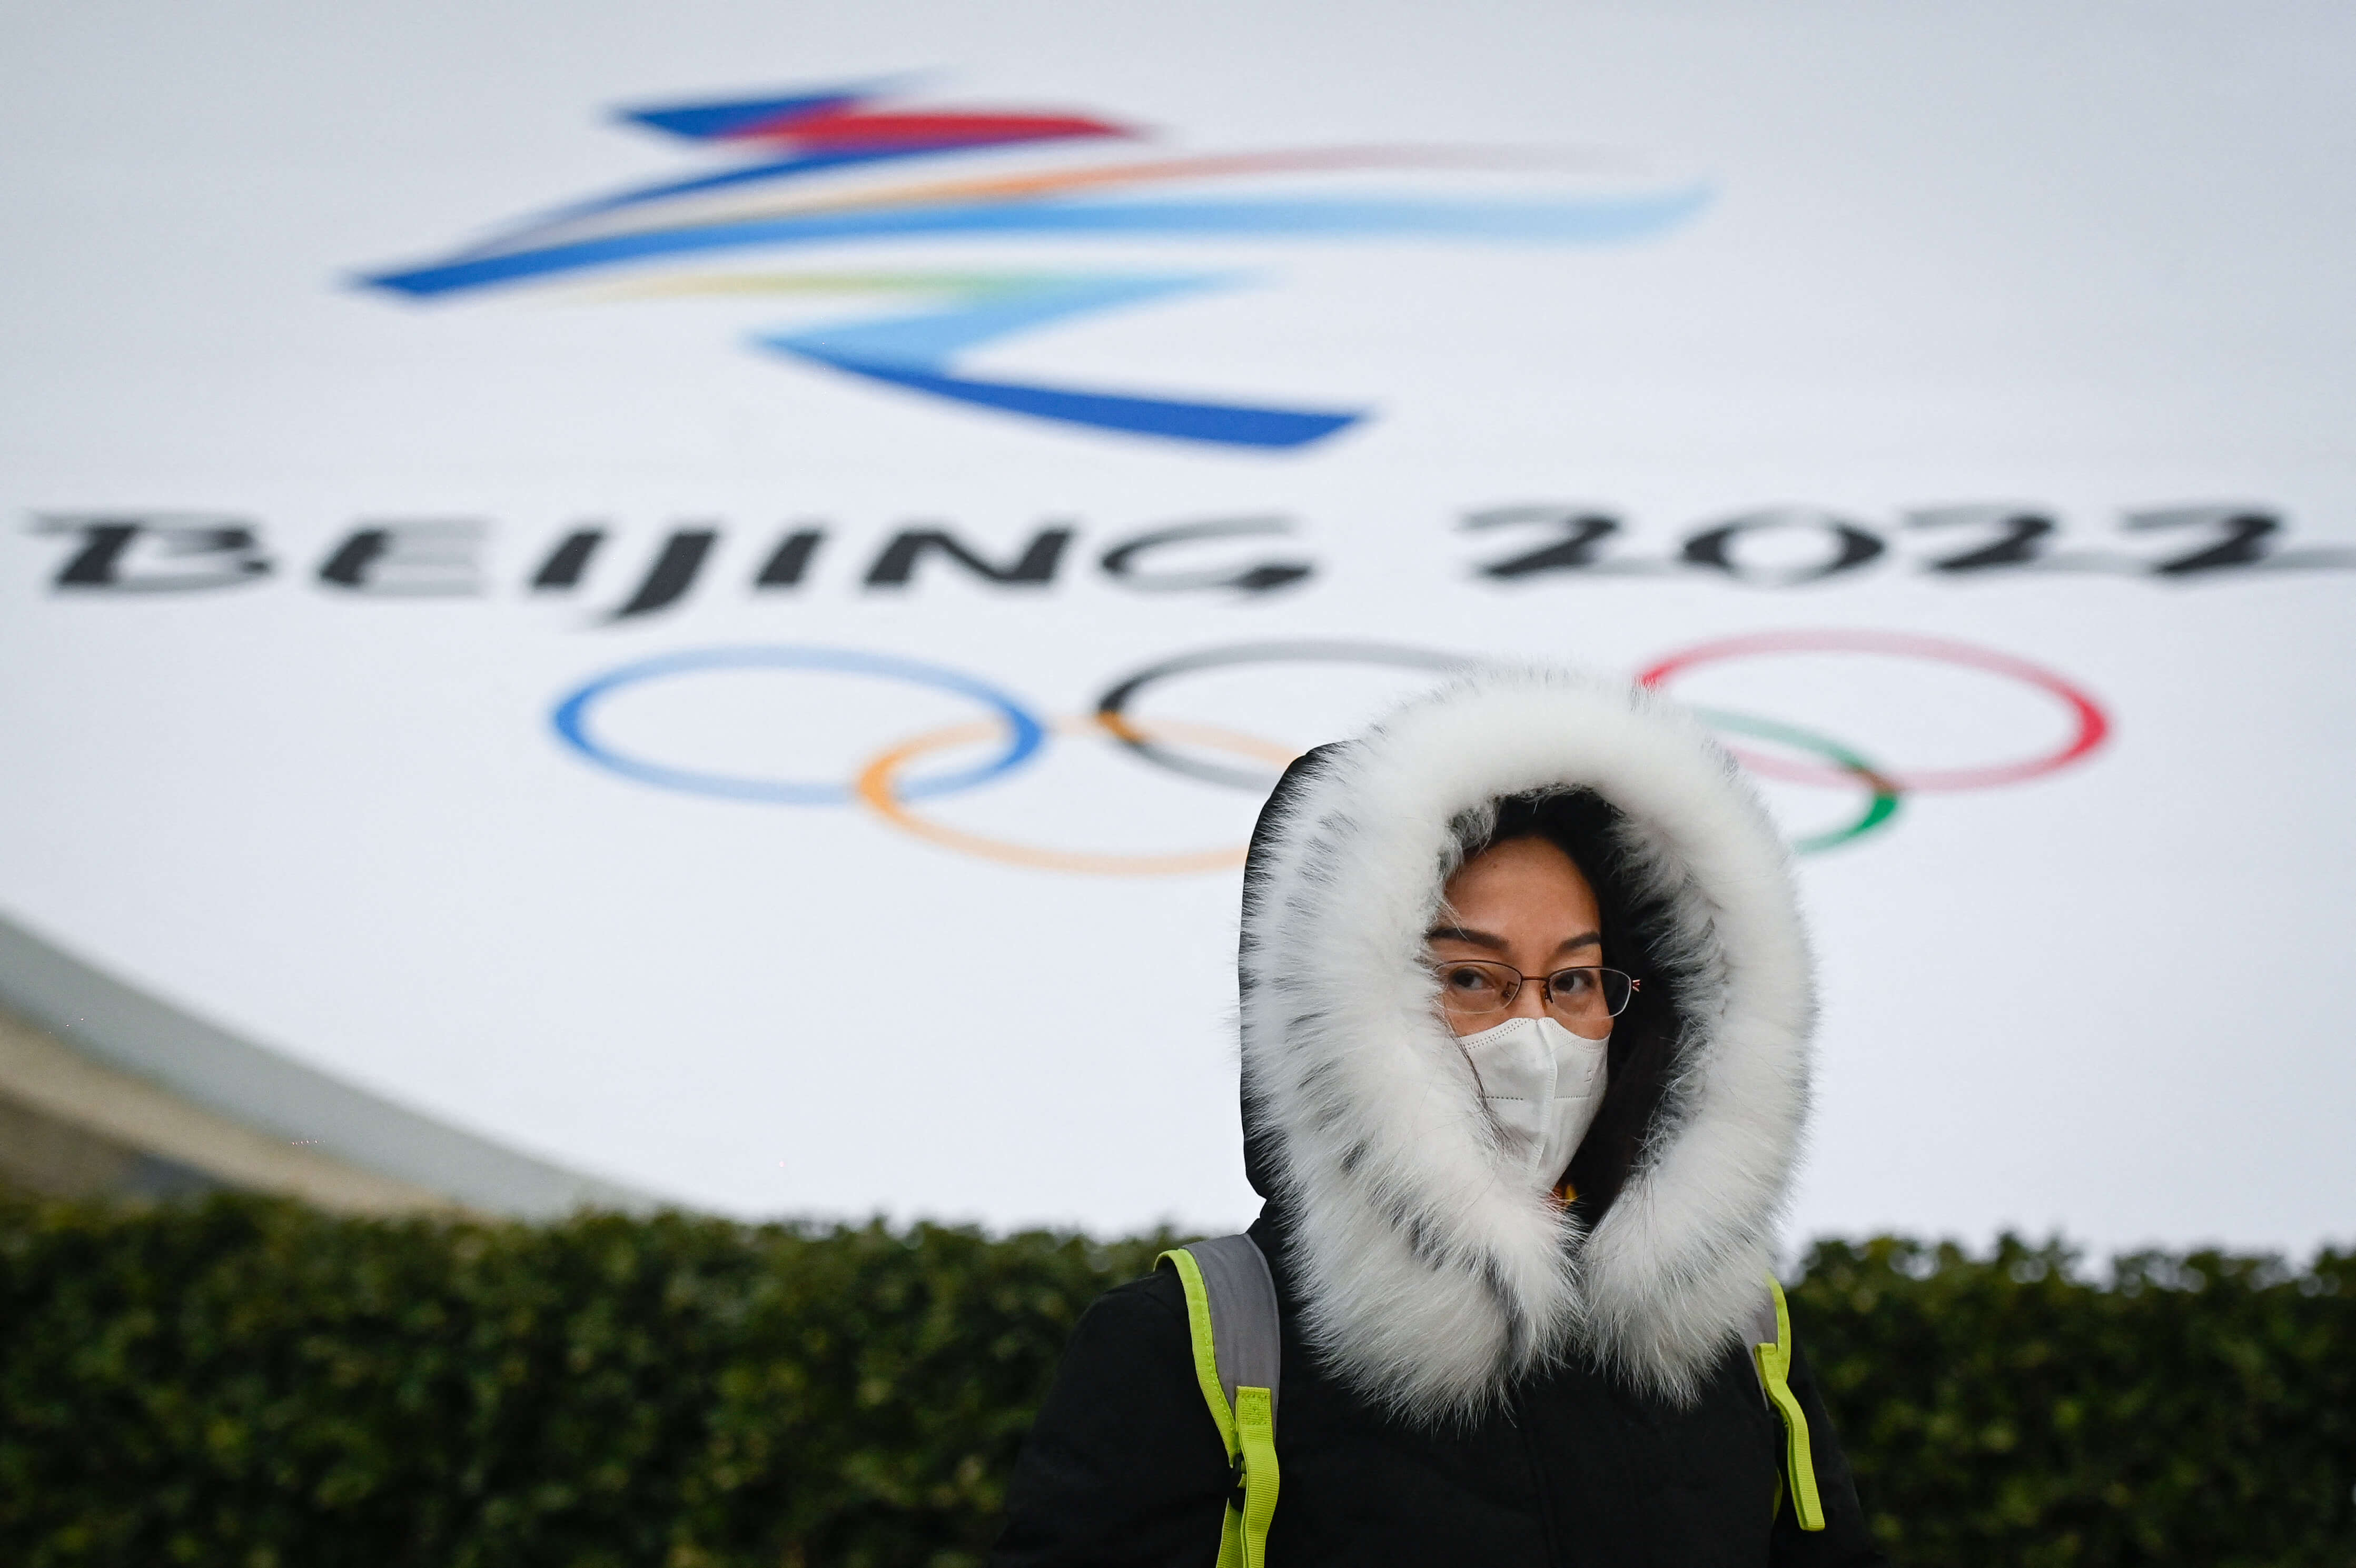 Ahead of the Winter Olympics, Beijing faces a dual-variant threat